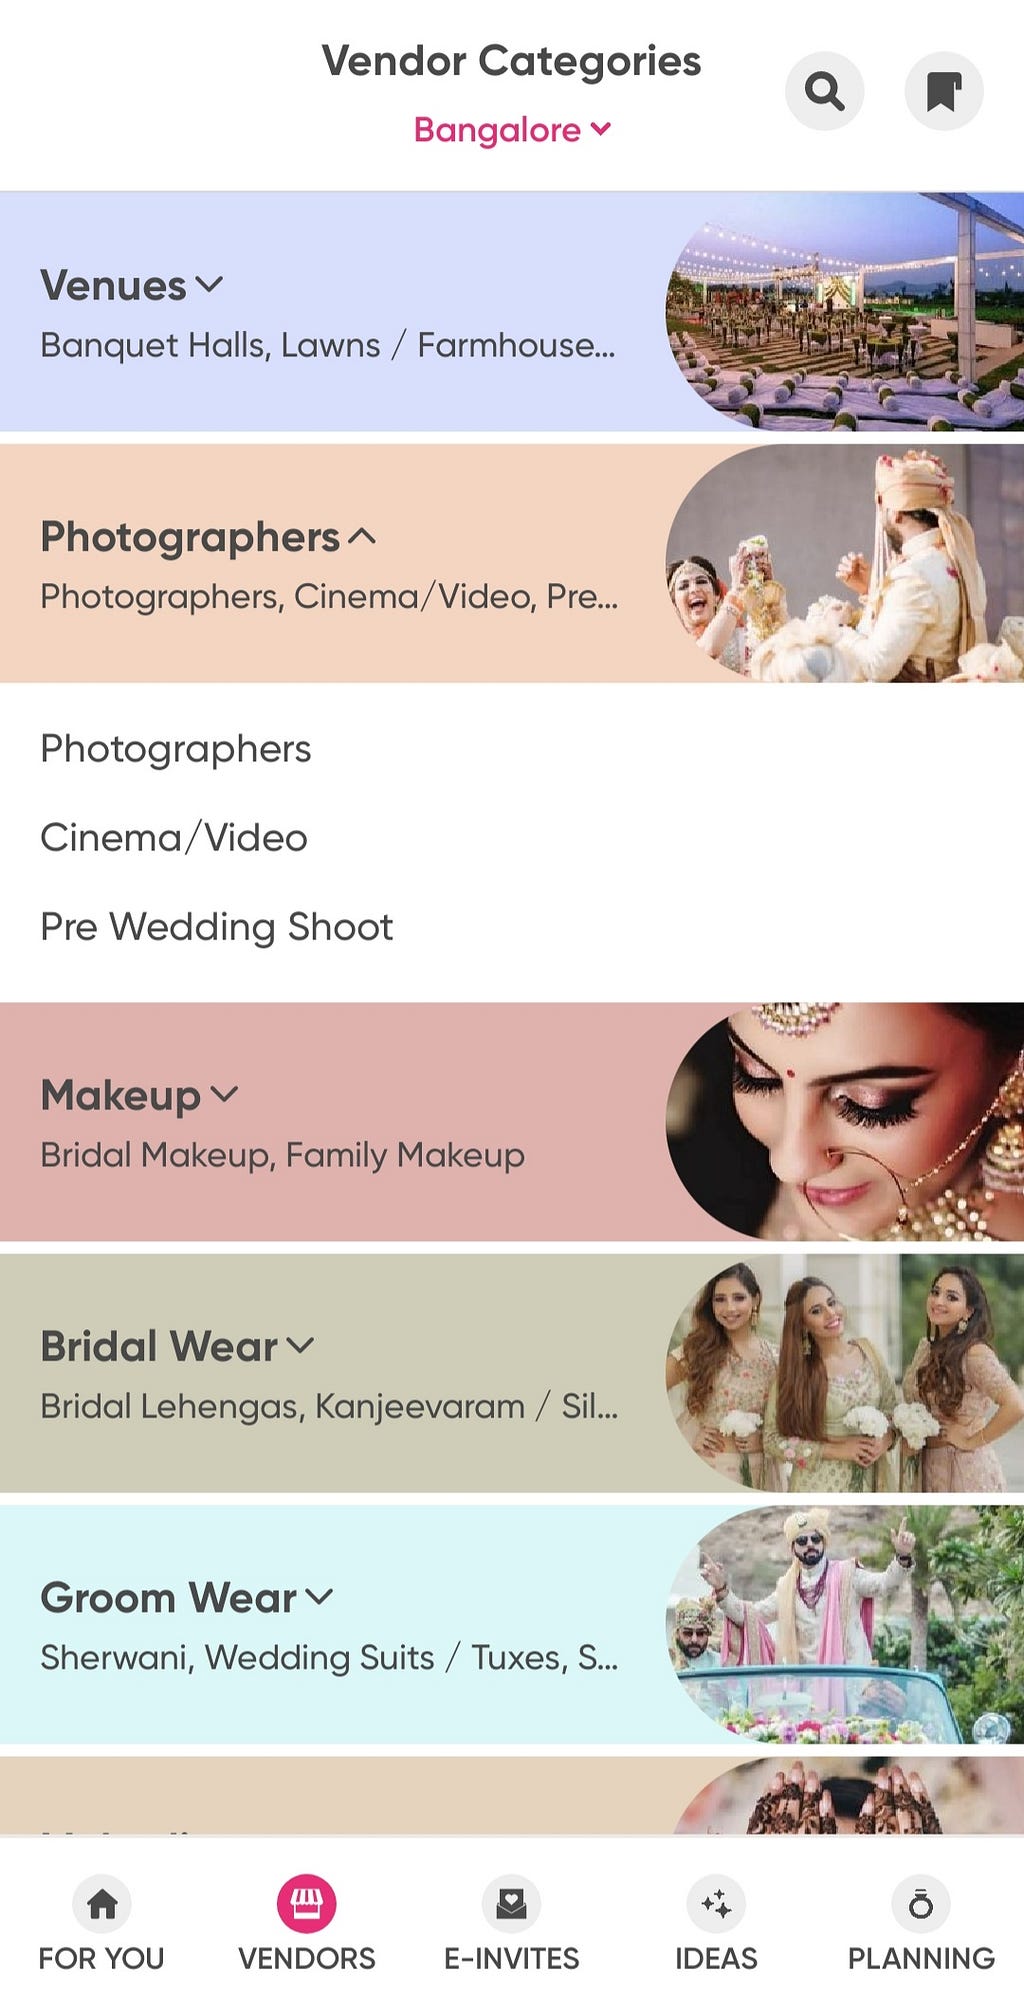 The Vedor page of the app showing the different categories